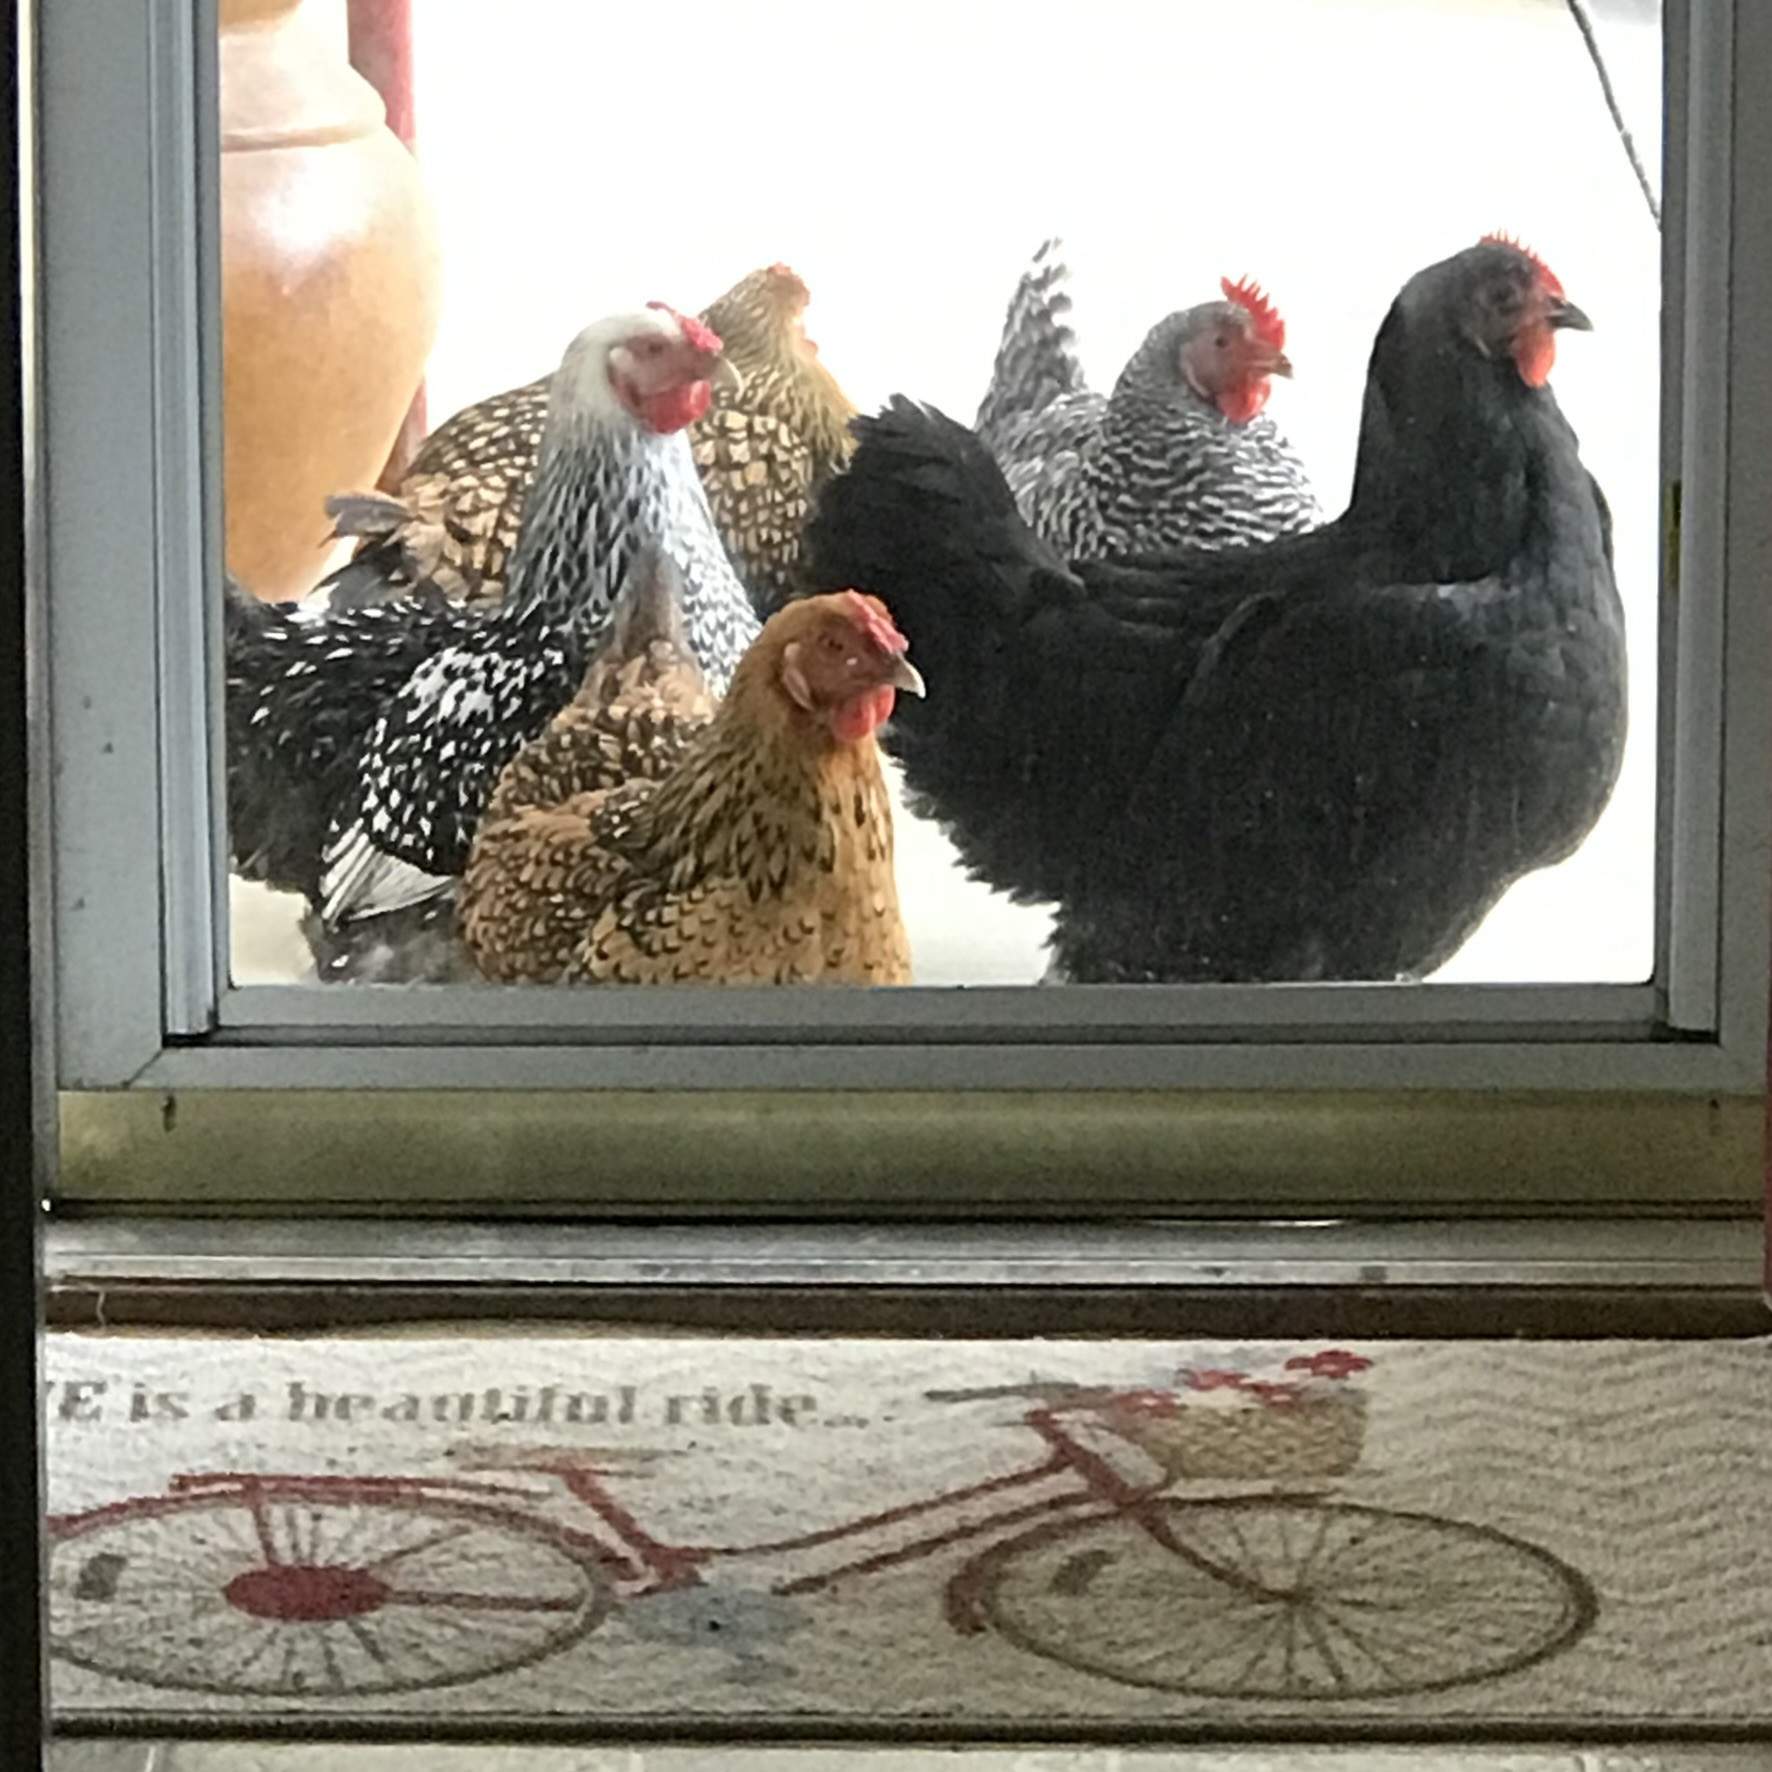 Five colorful chickens waiting at the glass door.